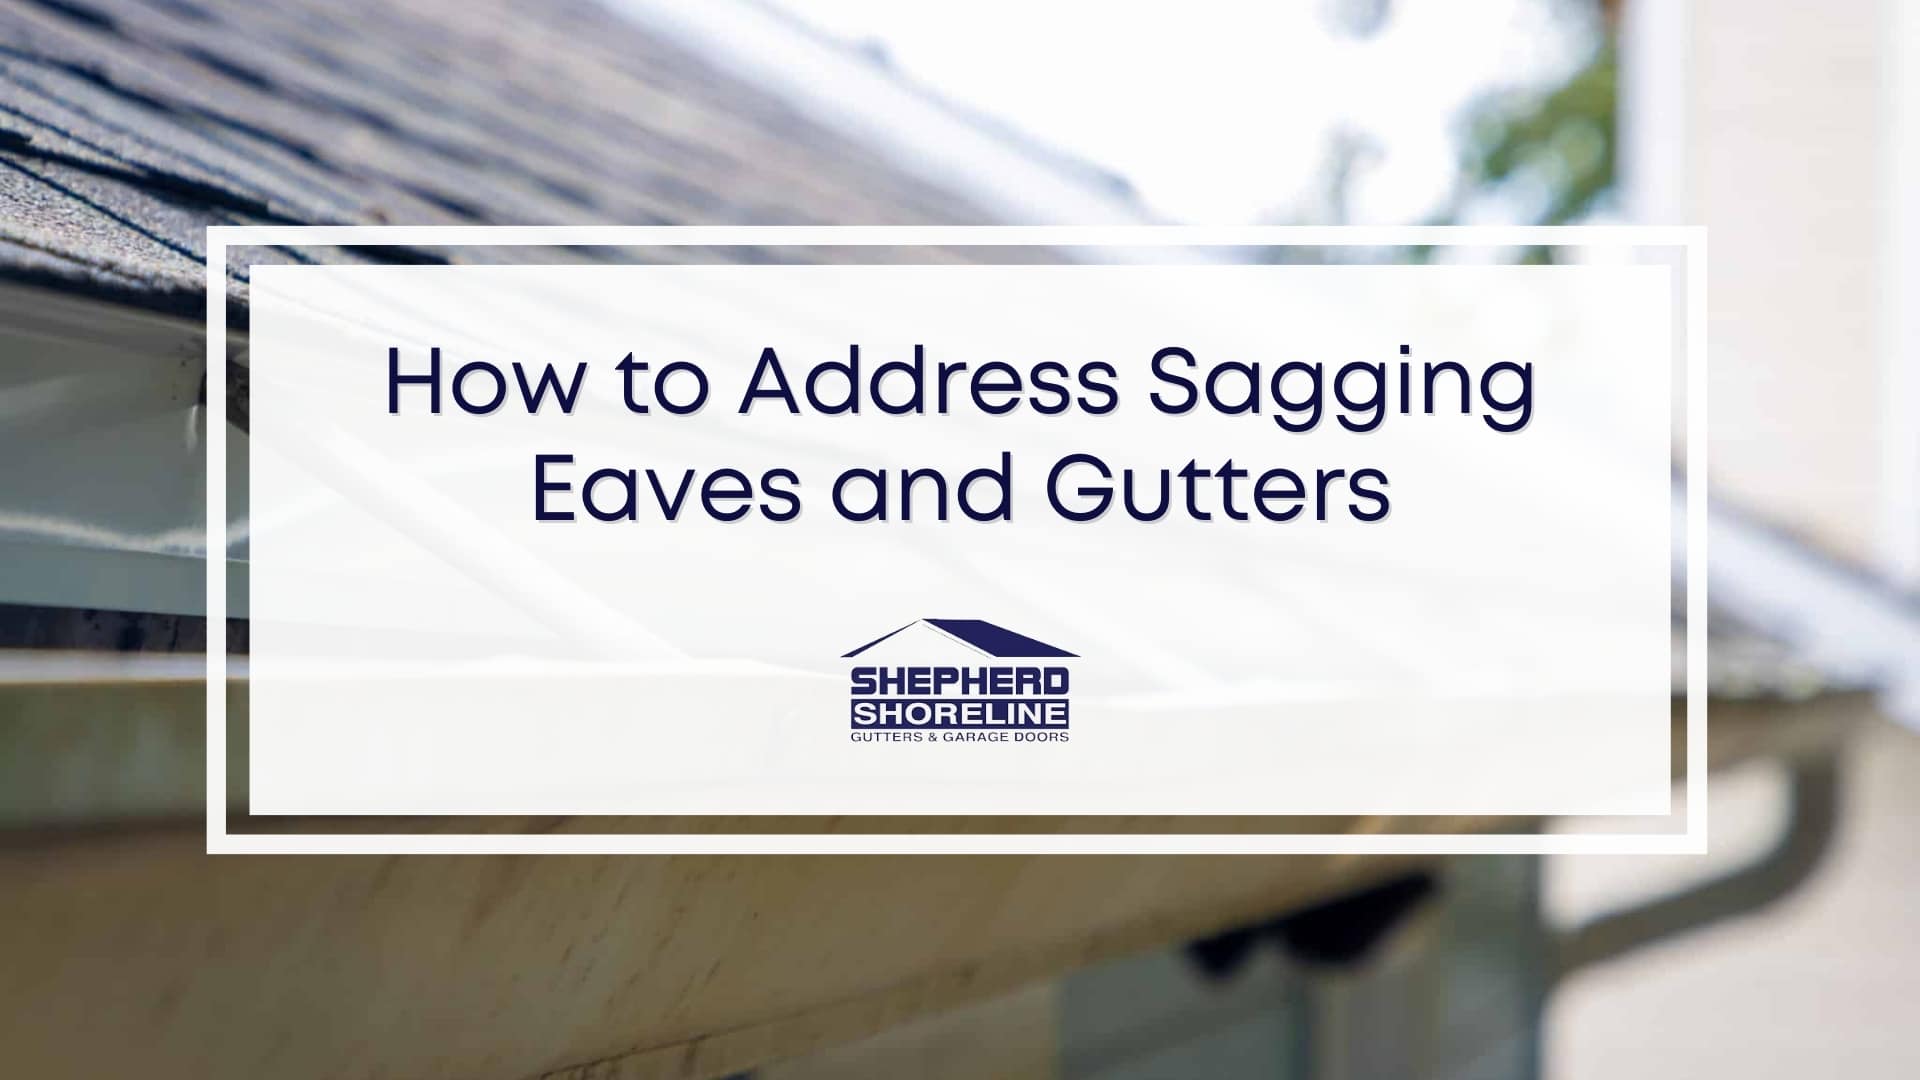 Featured image of how to address sagging eaves and gutters